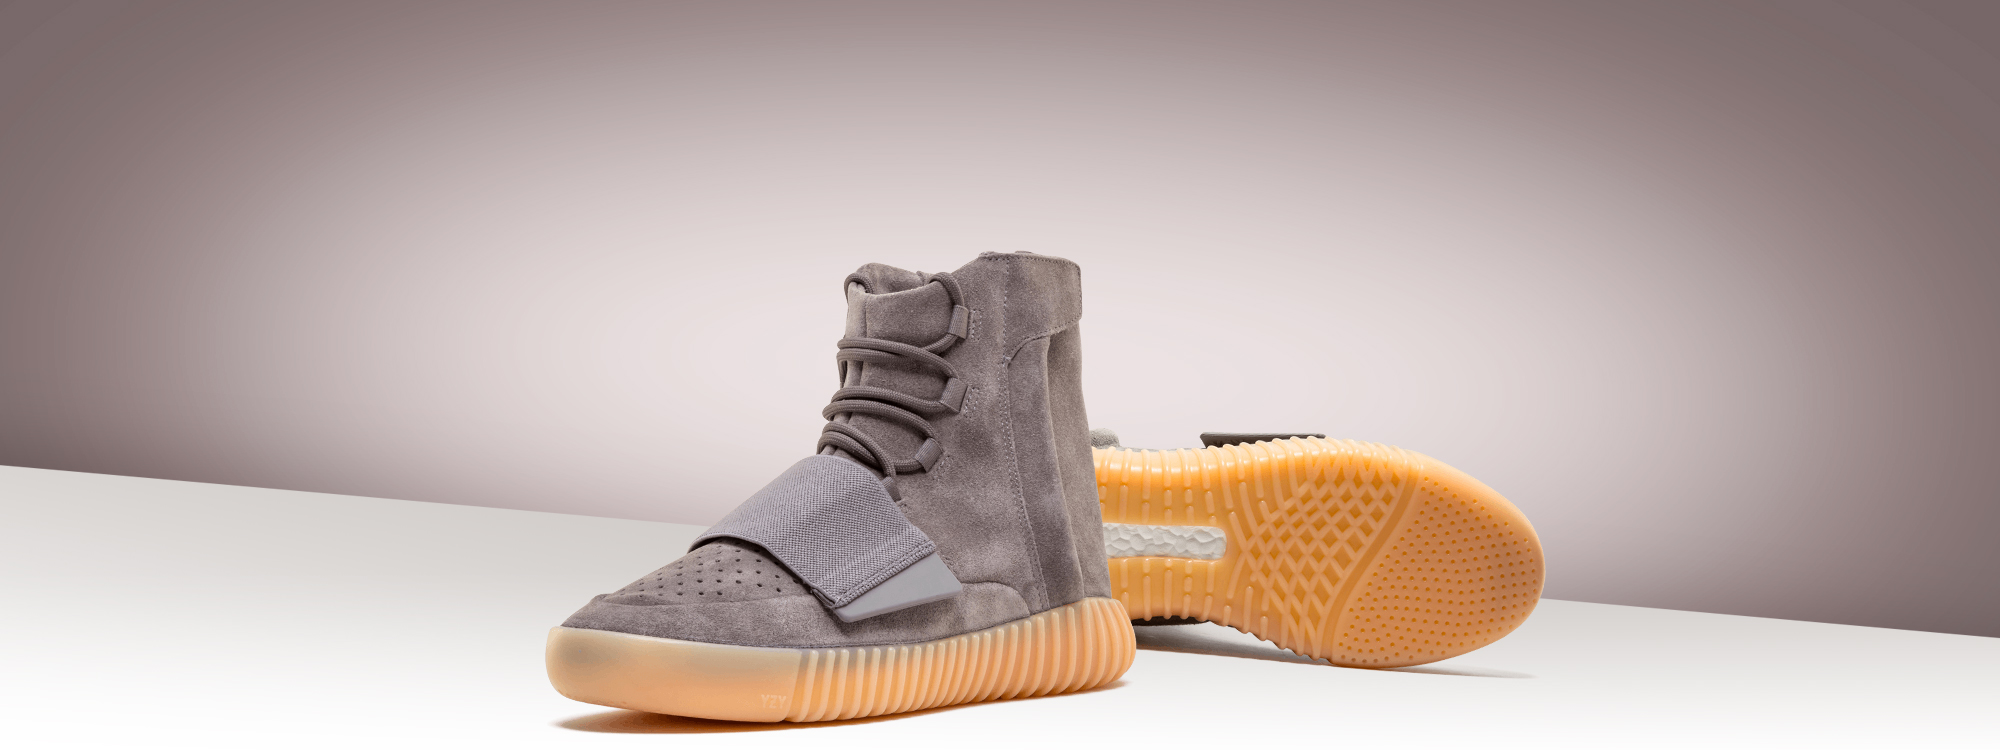 buy real  Yeezy Boost 750  Light Grey / Gum for 265 USD only